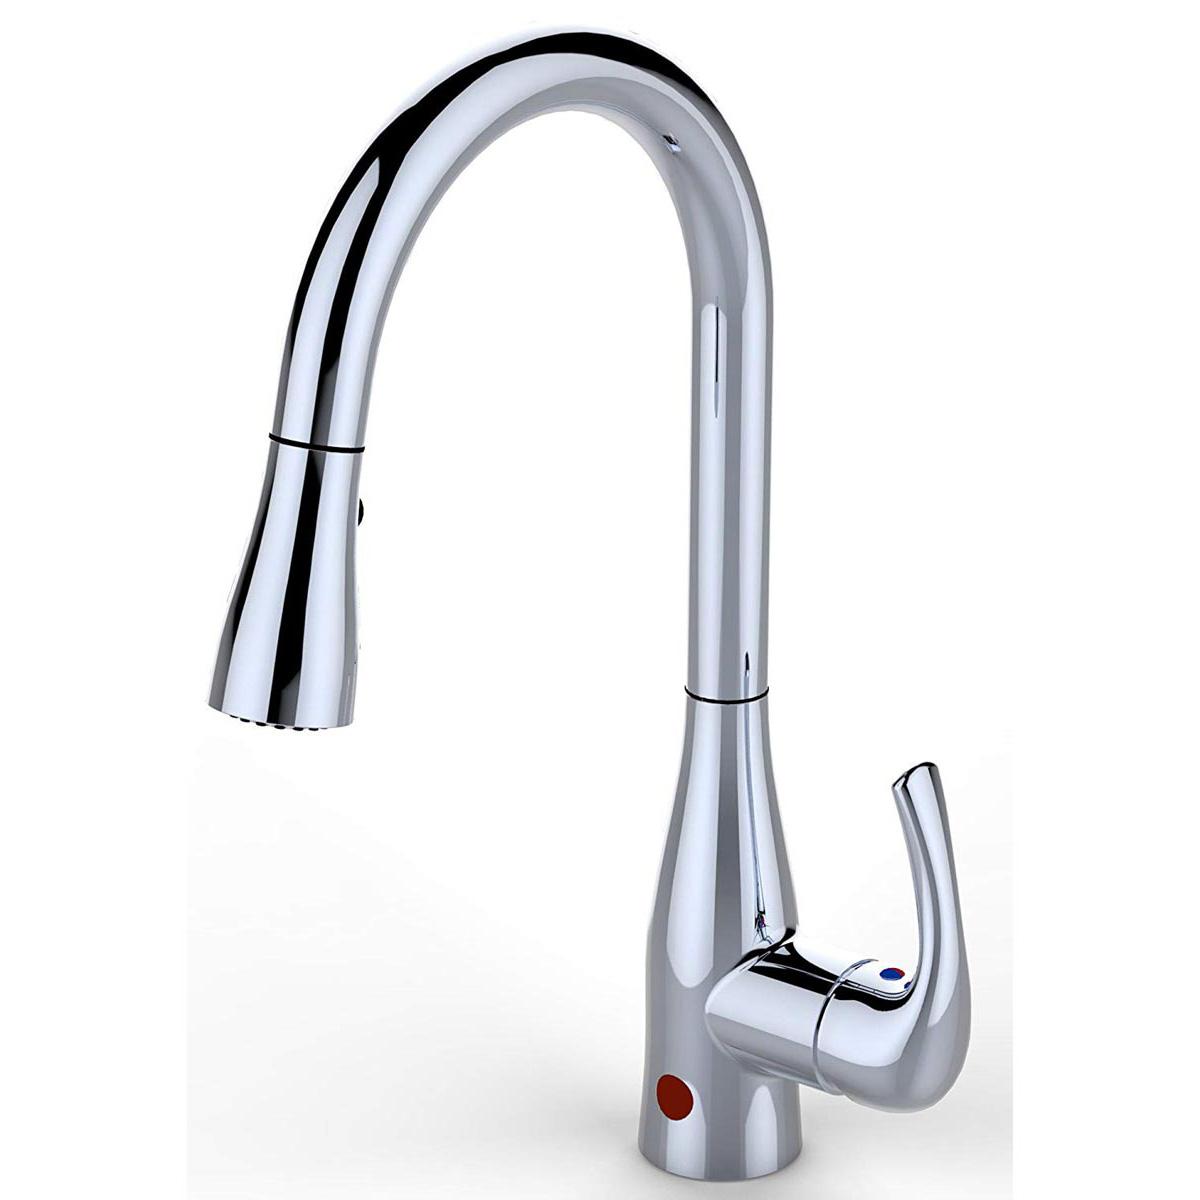 Flow Motion Activated Single-Handle Kitchen Faucet for $119 Shipped